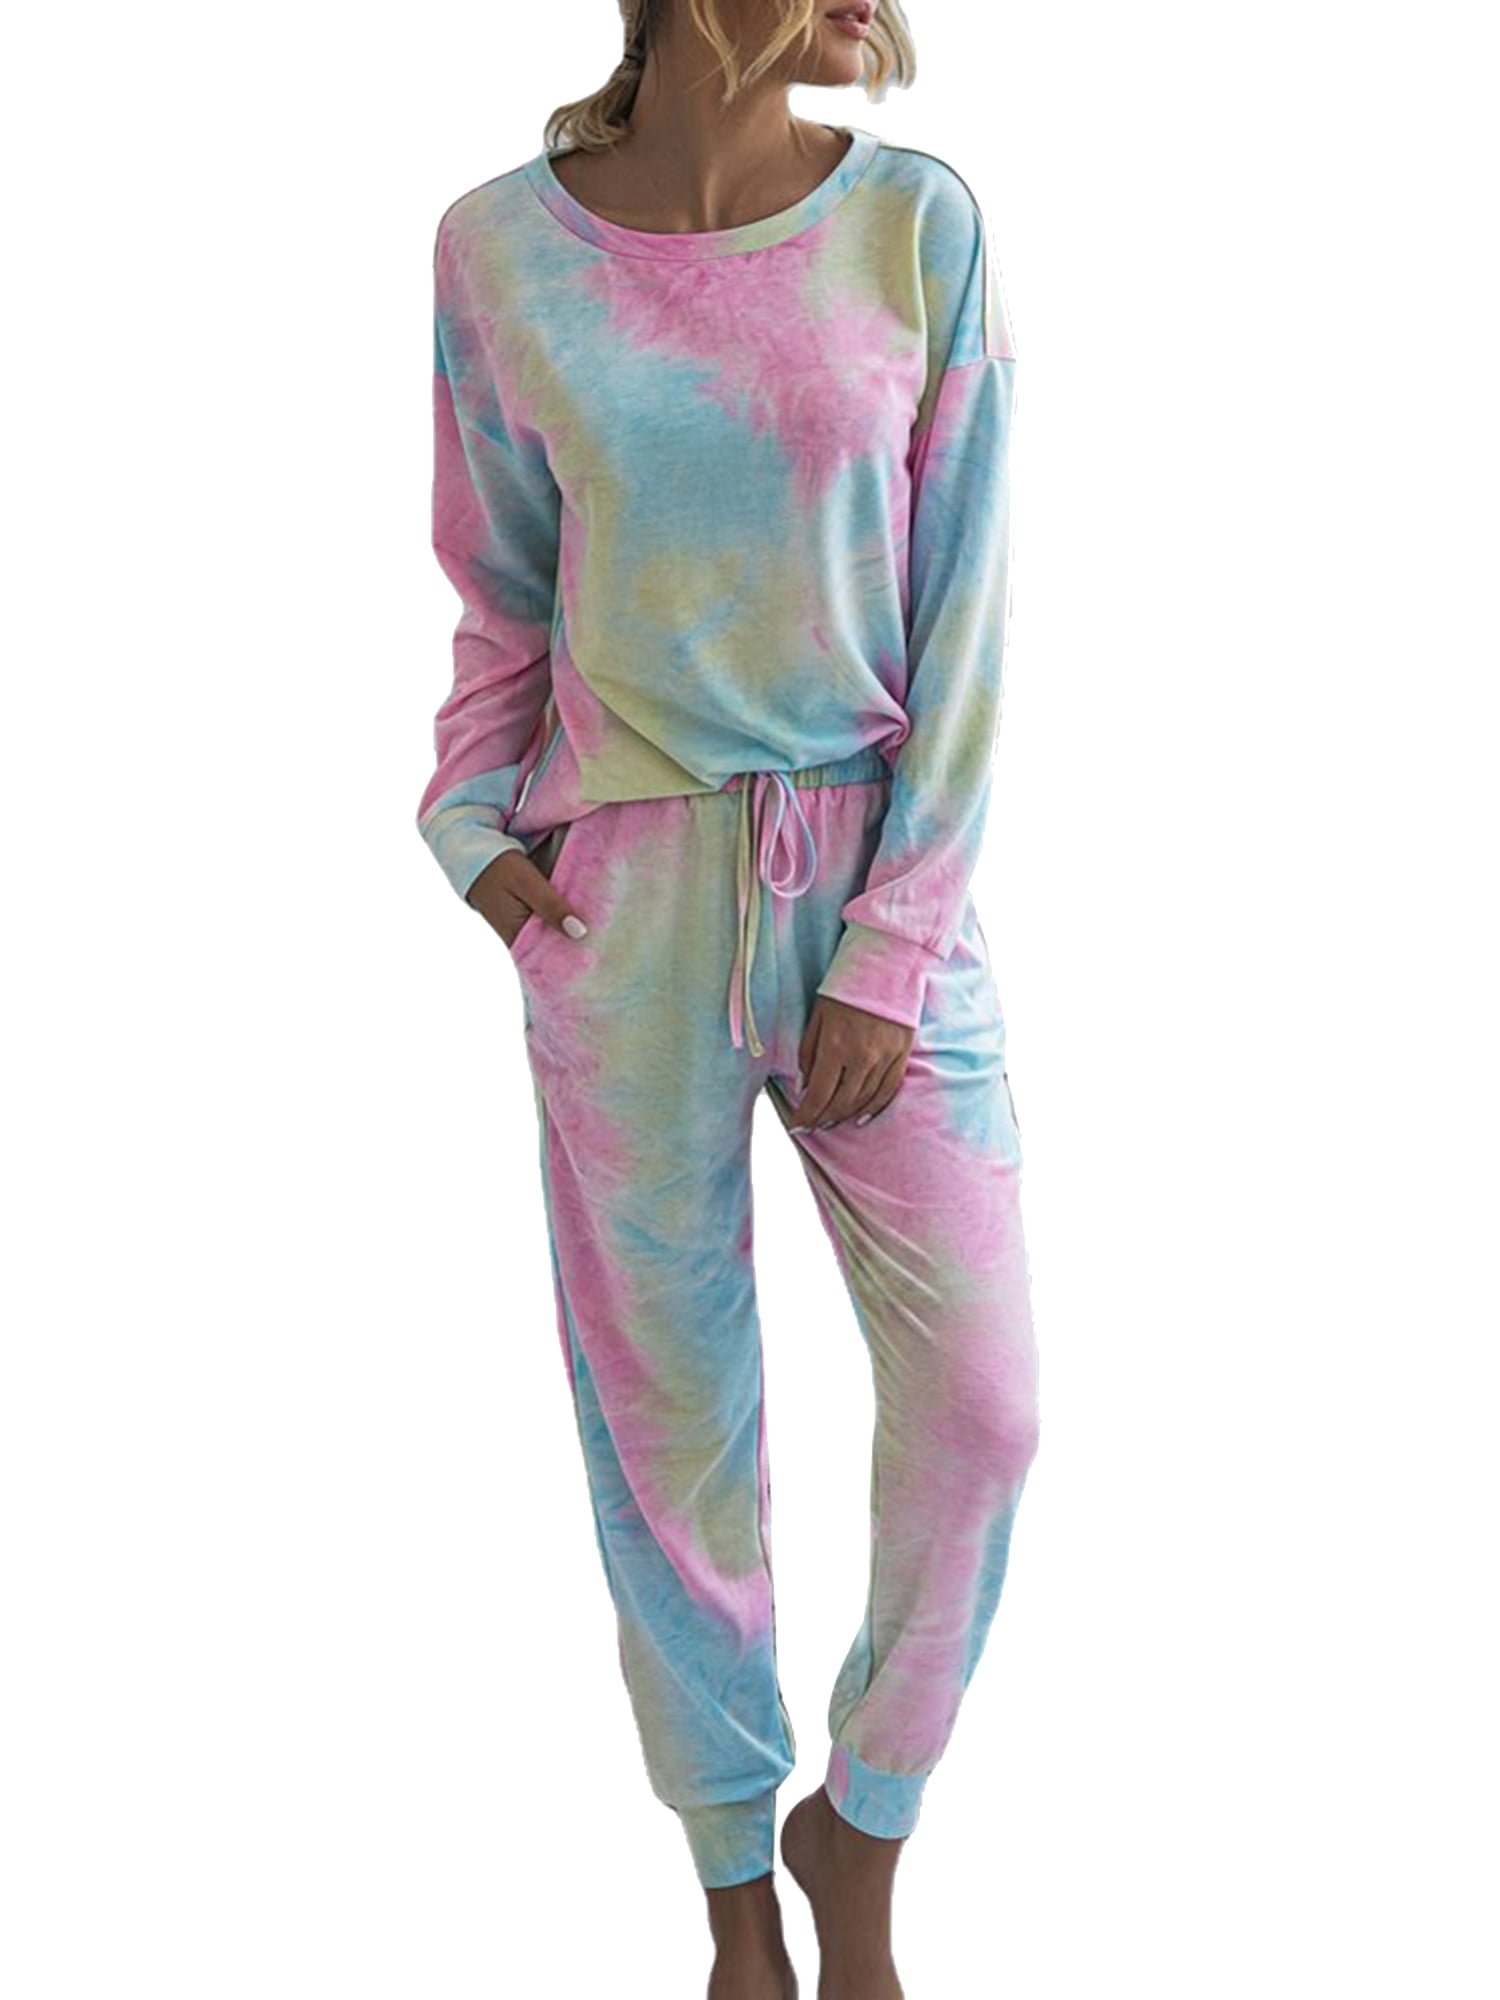 Details about   2PC Women Casual Home Sleepwear Tie-dye Long Sleeves Tops Trouser Pant Tracksuit